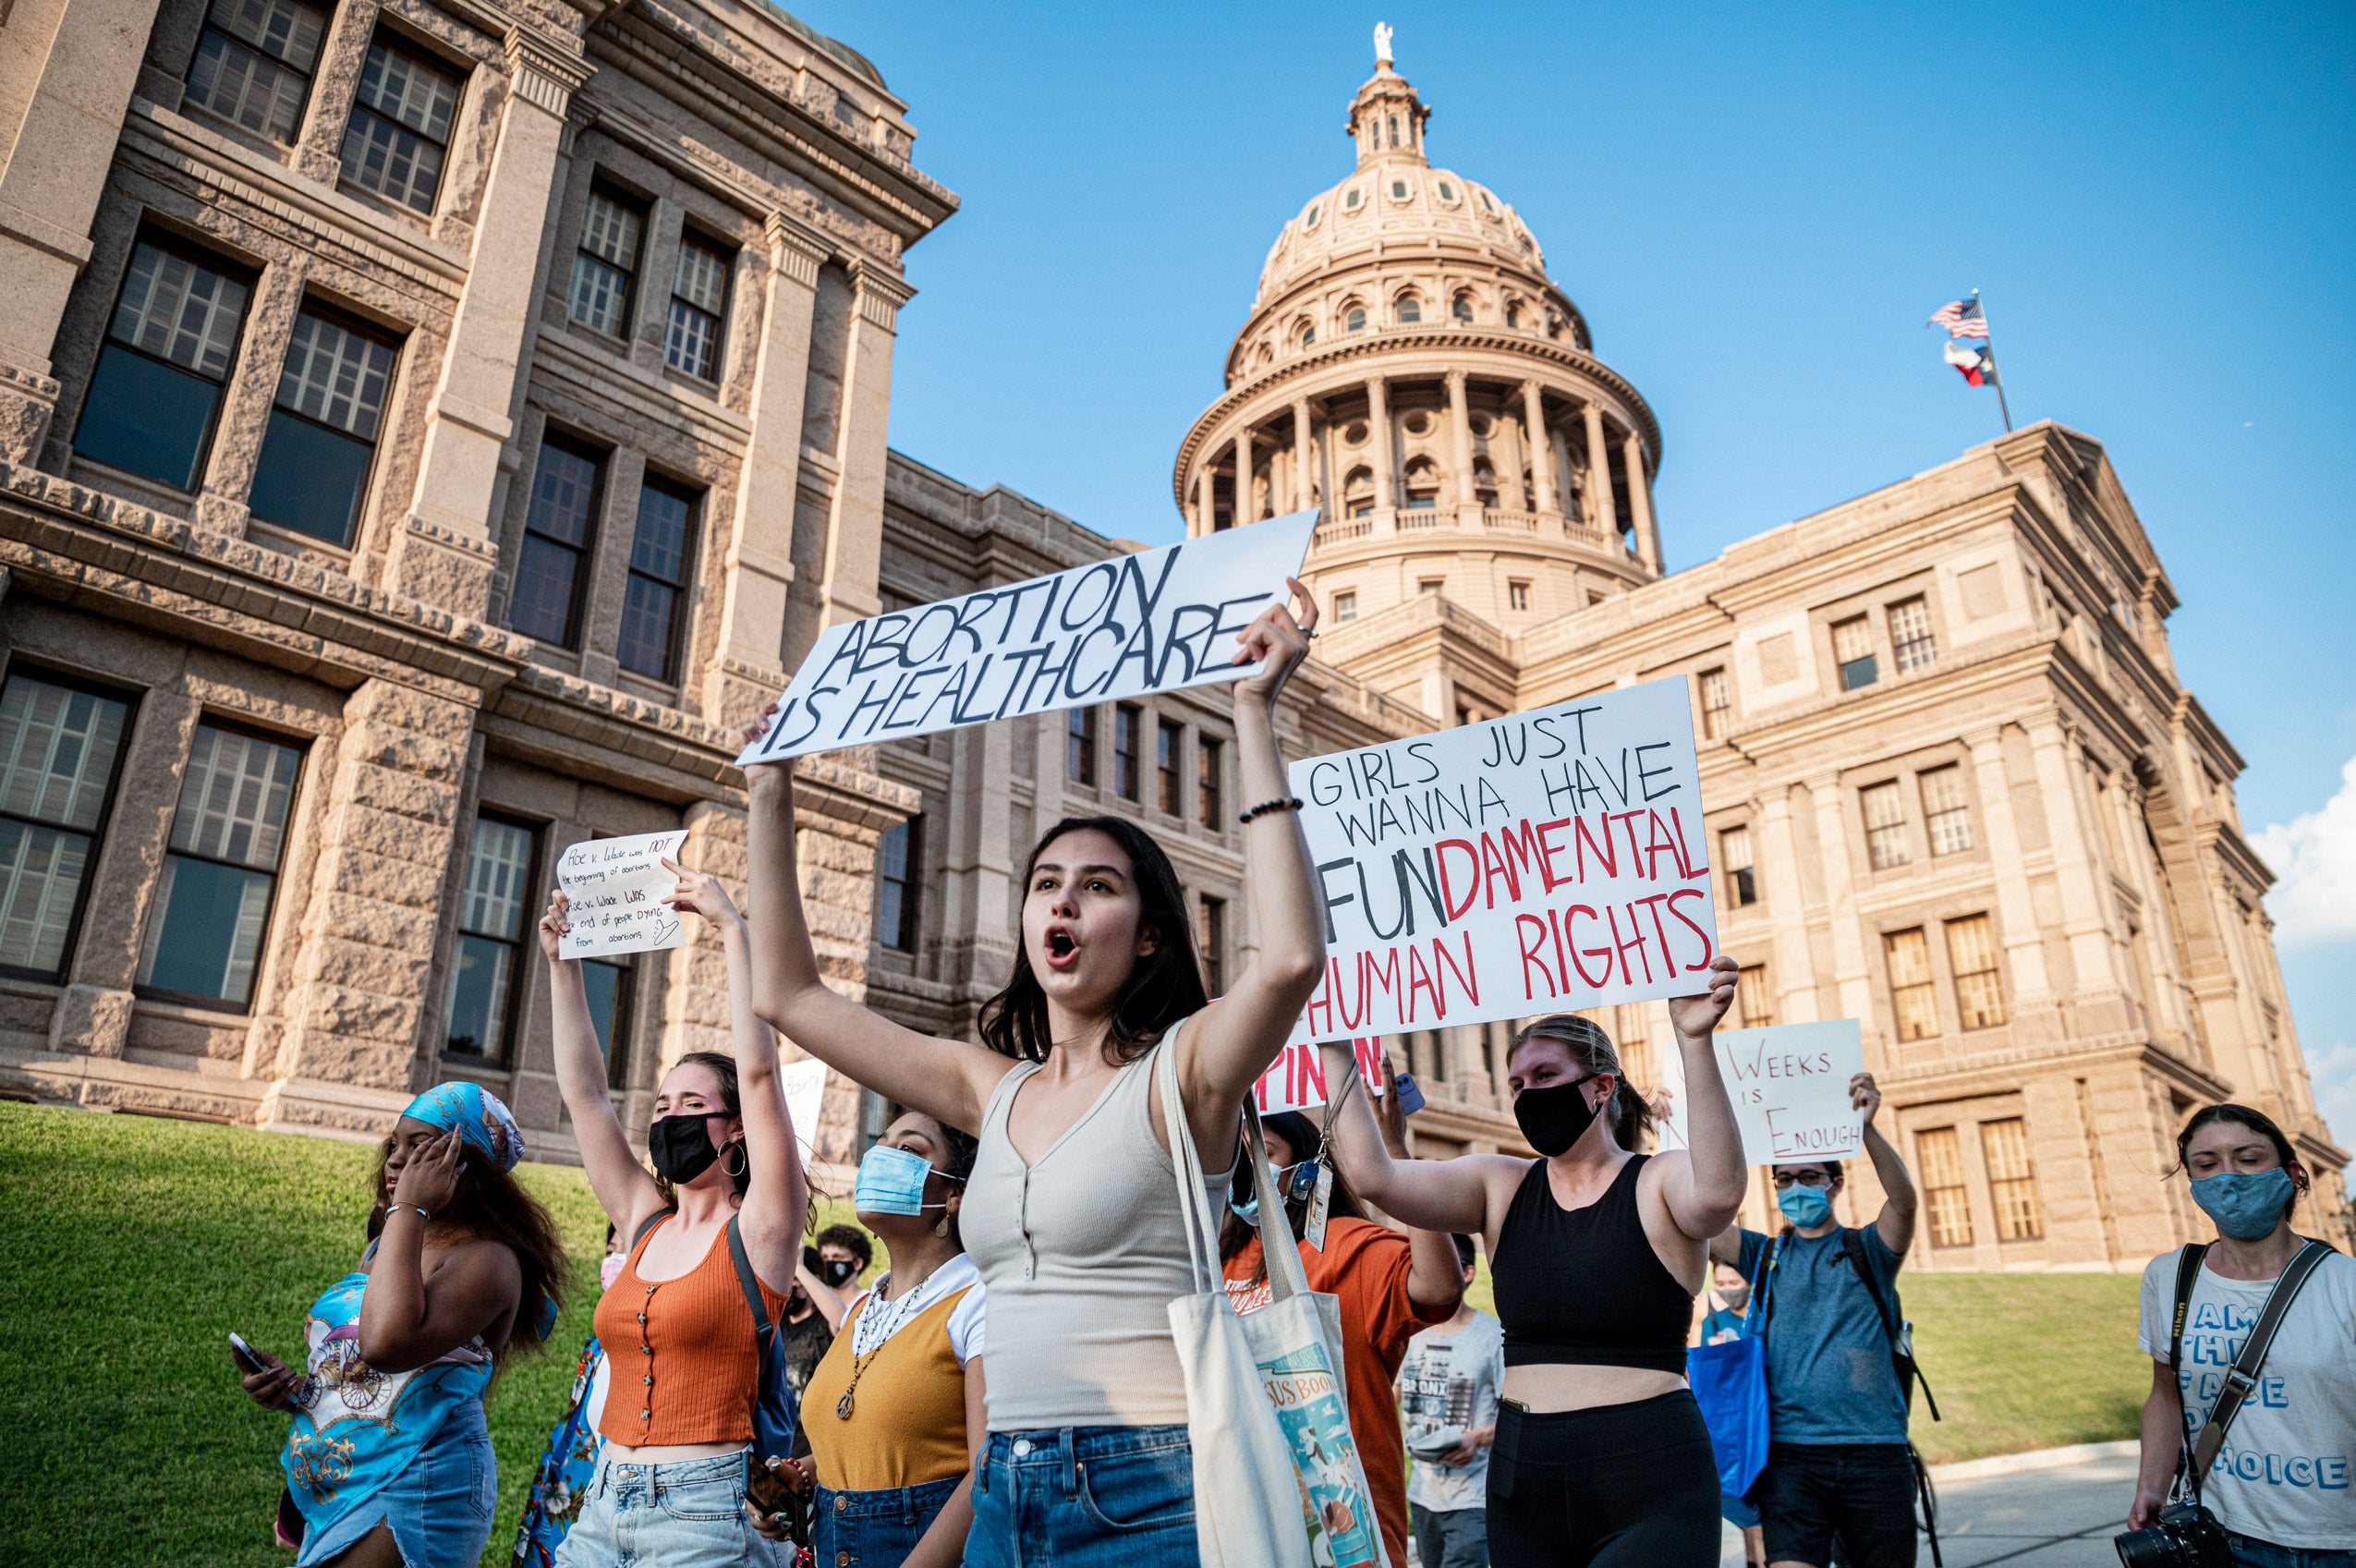 Female protesters holding signs march outside the Texas State Capitol